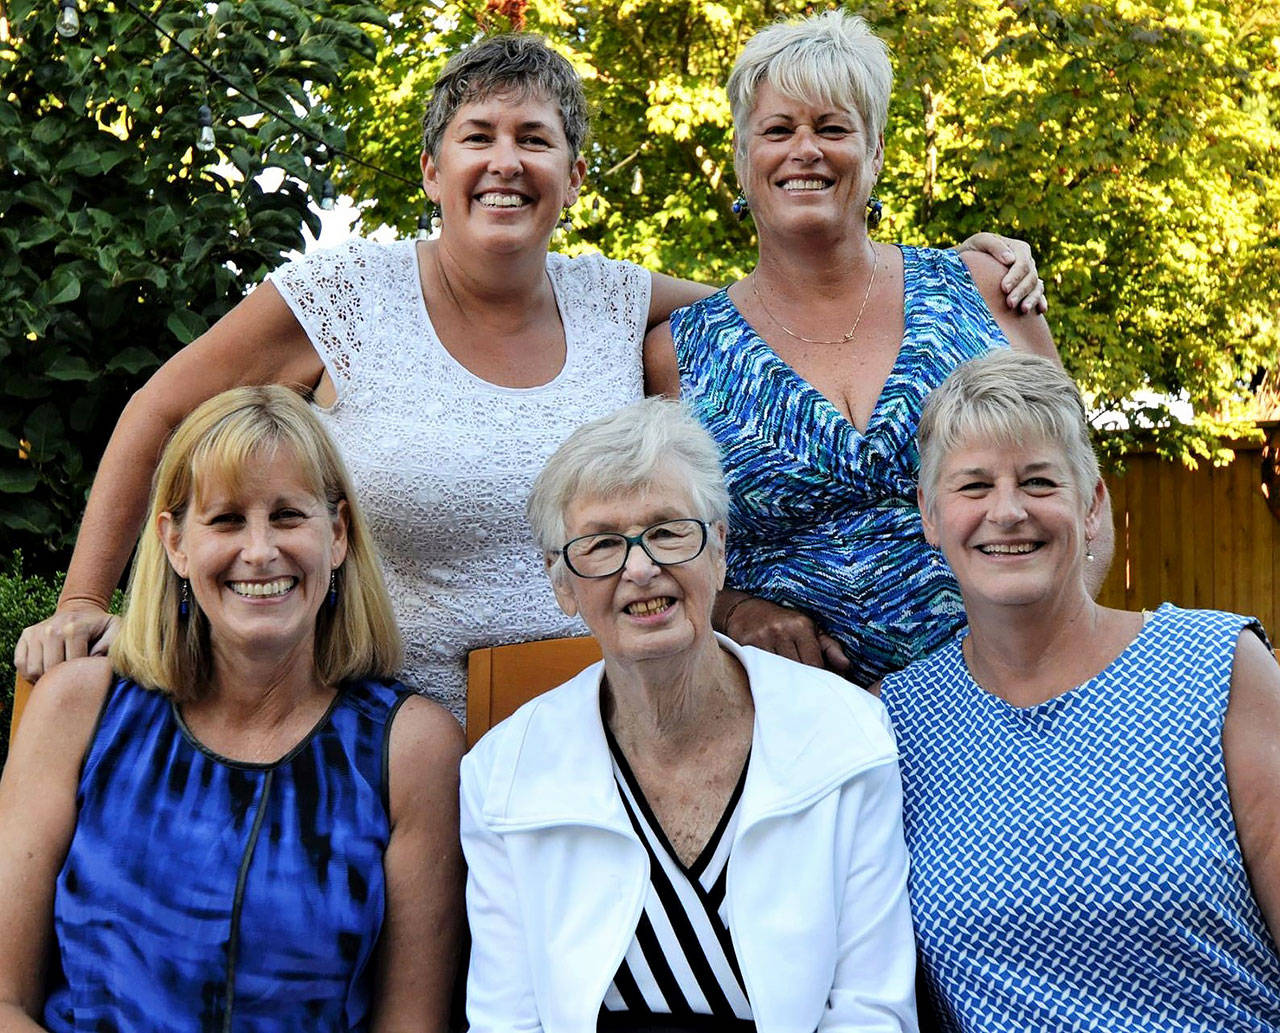 Jeanne Metzger (center, bottom row) on her 85th birthday with daughters Maddy Metzger-Utt (top left), Jo Metzger-Levin (top right), Meg Metzger (bottom left) and Jan Brossman (bottom right). A longtime Herald editor, Jeanne Metzger died Wednesday at age 89. (Contributed photo)